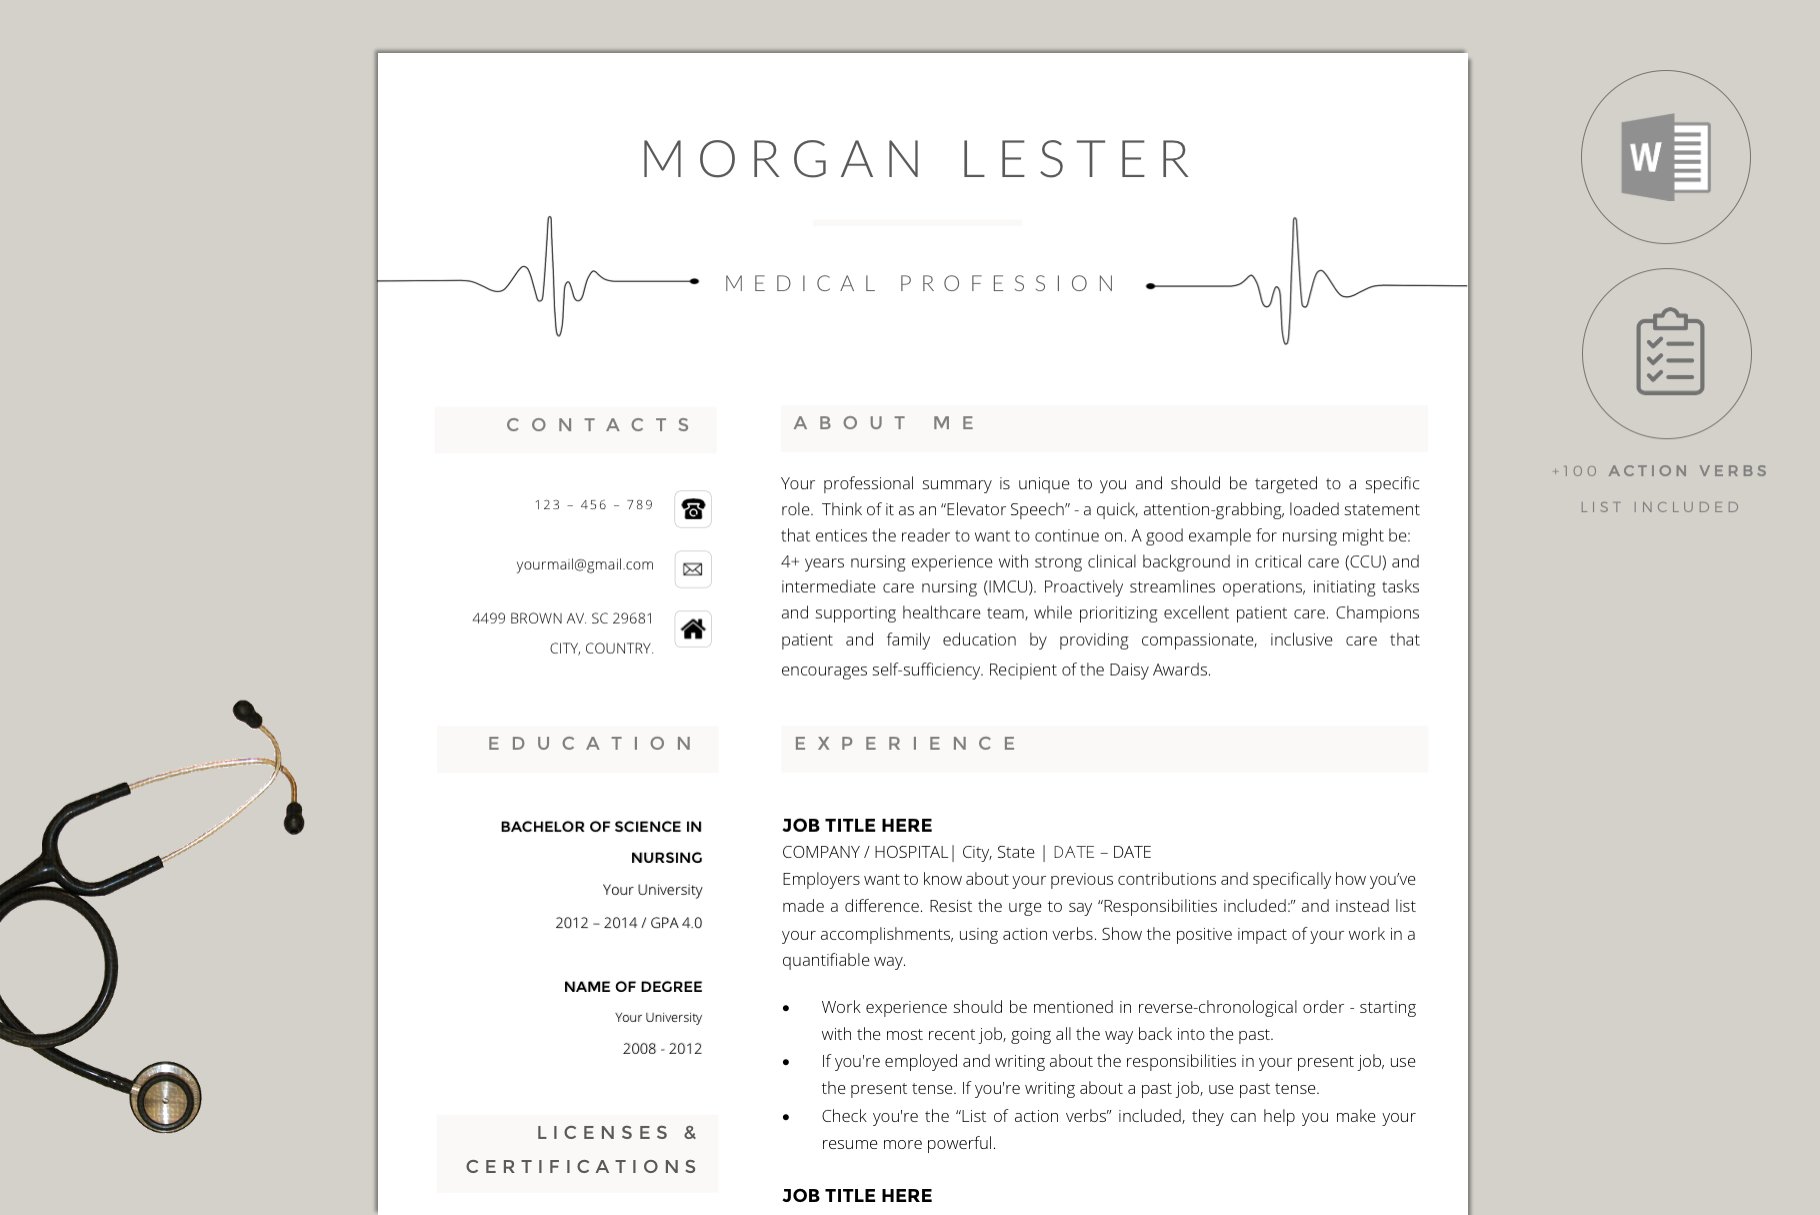 Medical professional resume with a stethoscope.